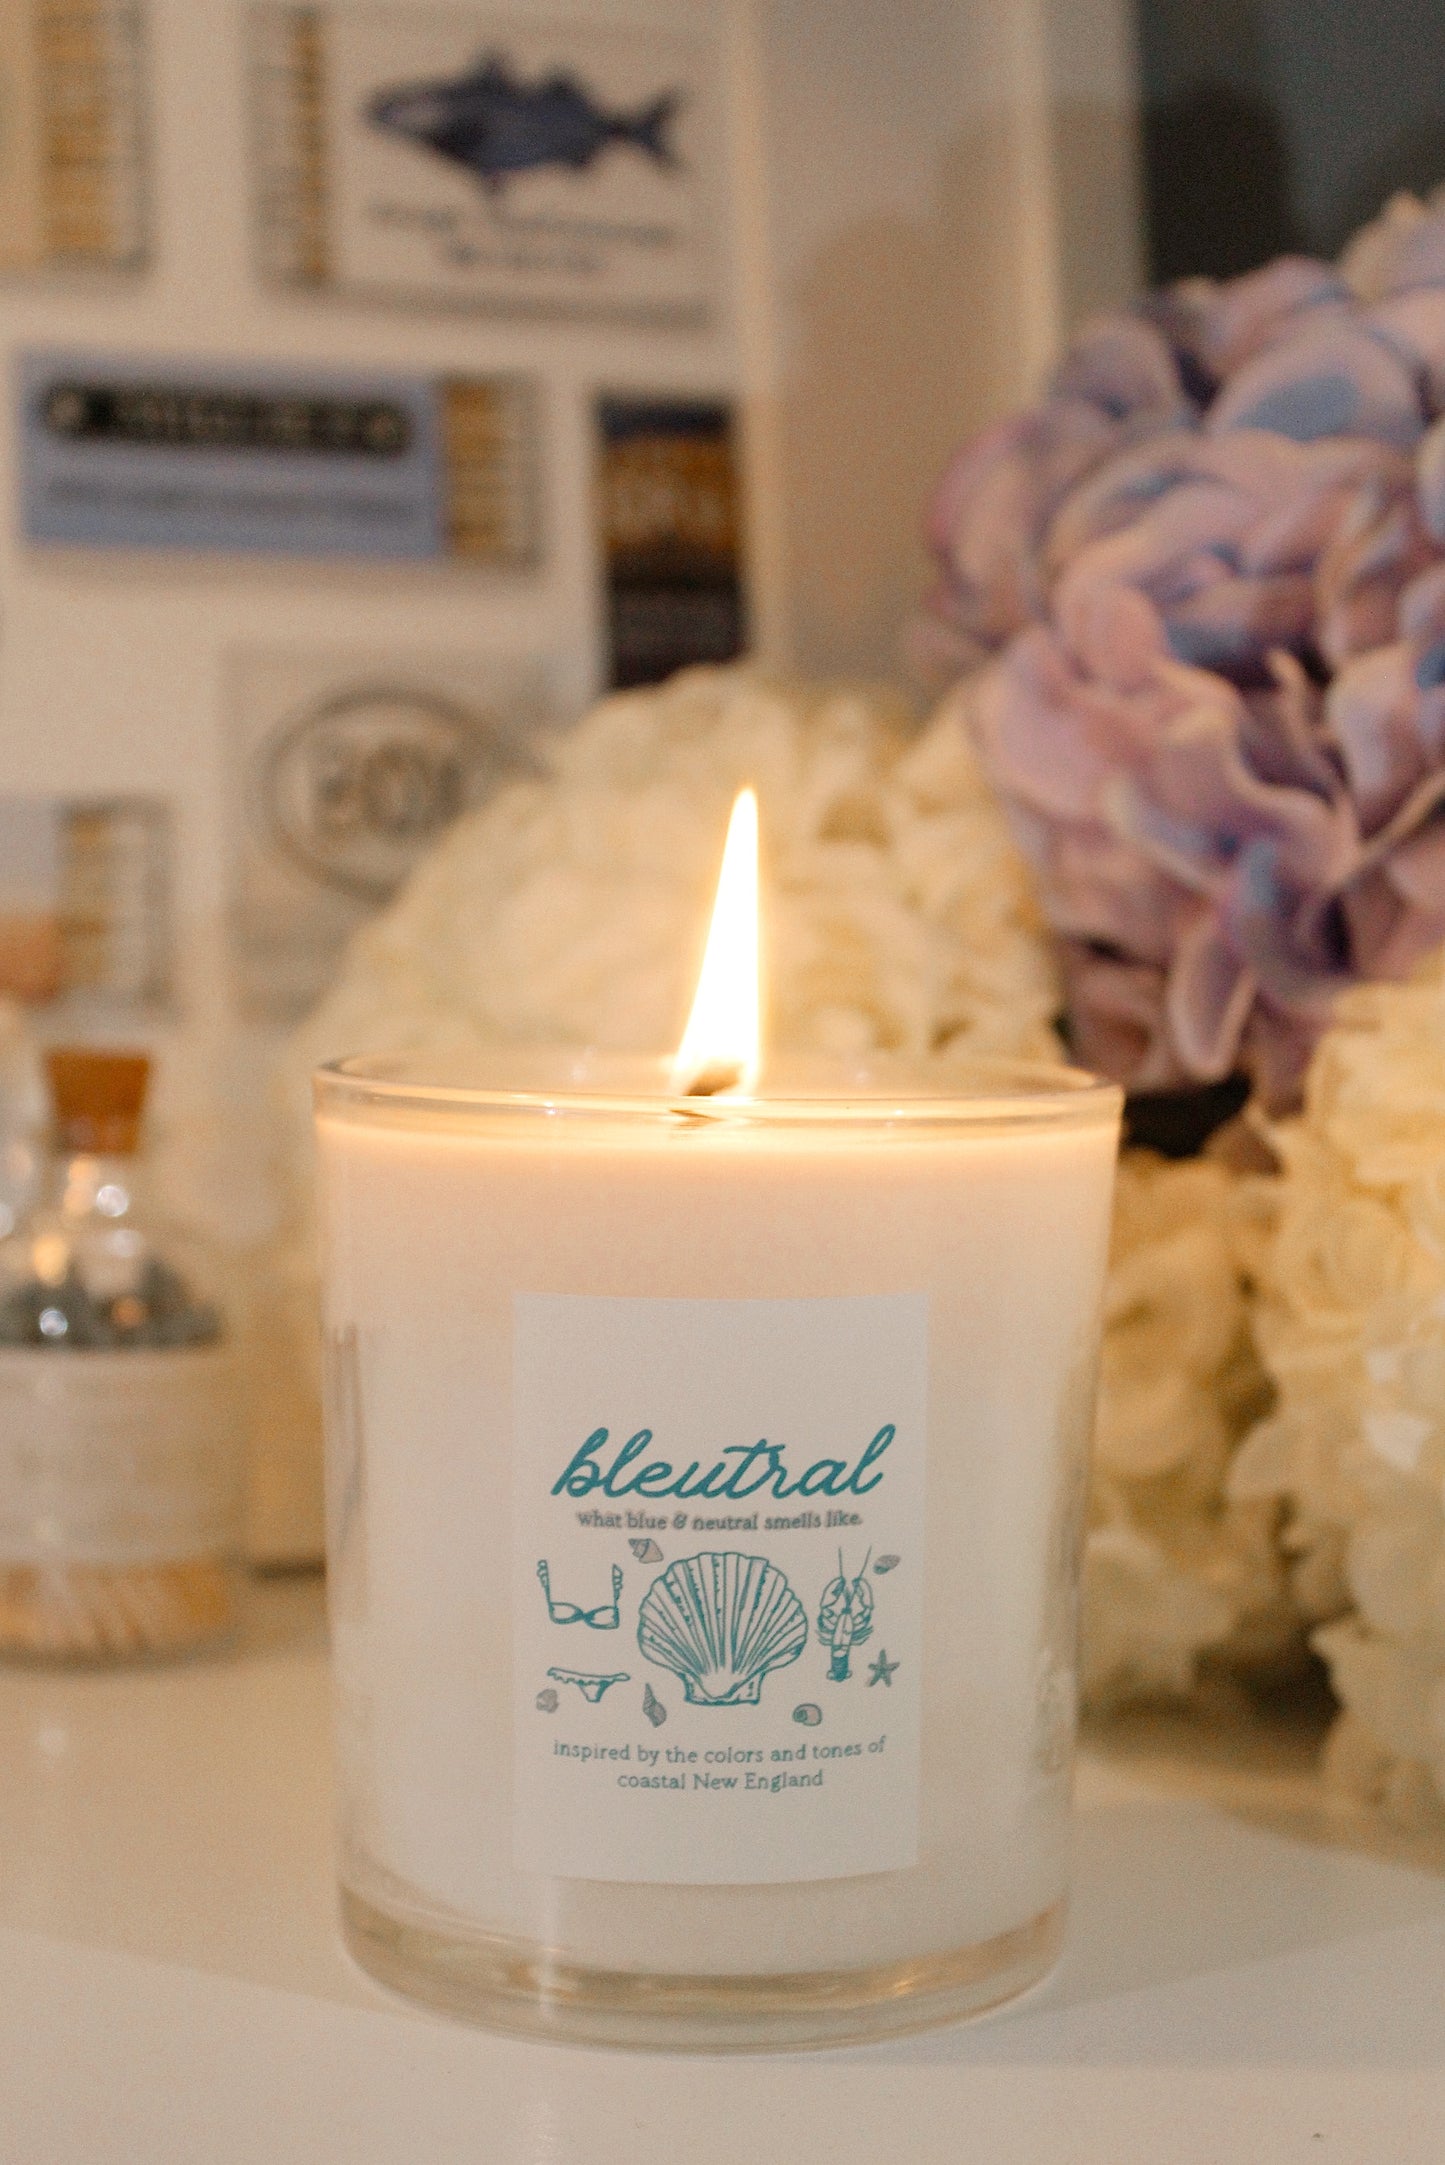 Bleutral Candle